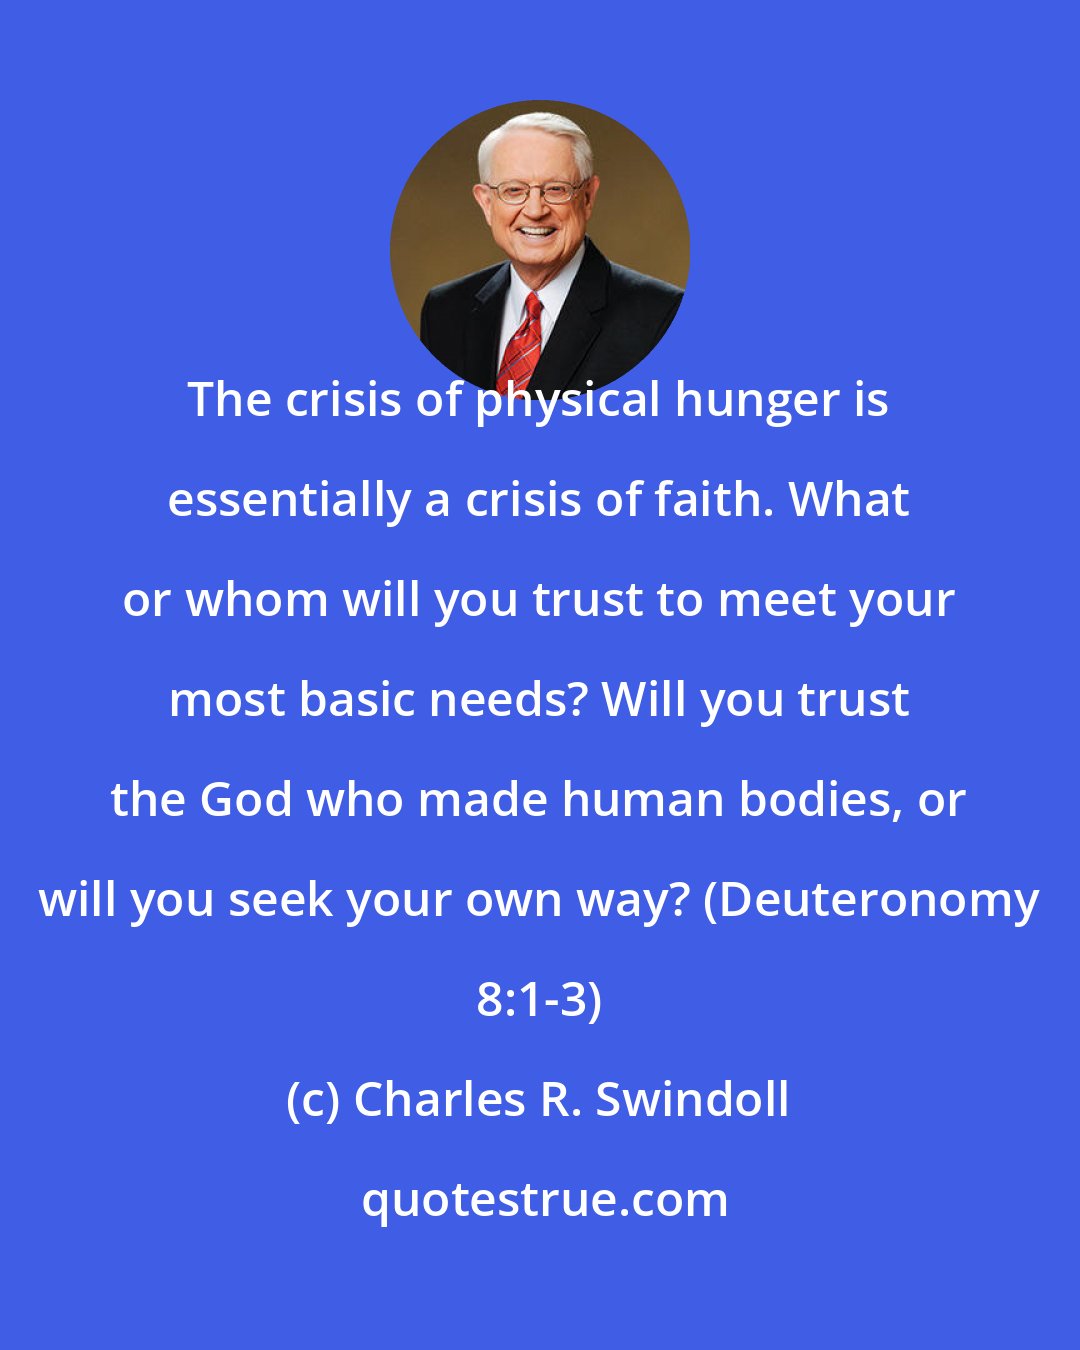 Charles R. Swindoll: The crisis of physical hunger is essentially a crisis of faith. What or whom will you trust to meet your most basic needs? Will you trust the God who made human bodies, or will you seek your own way? (Deuteronomy 8:1-3)